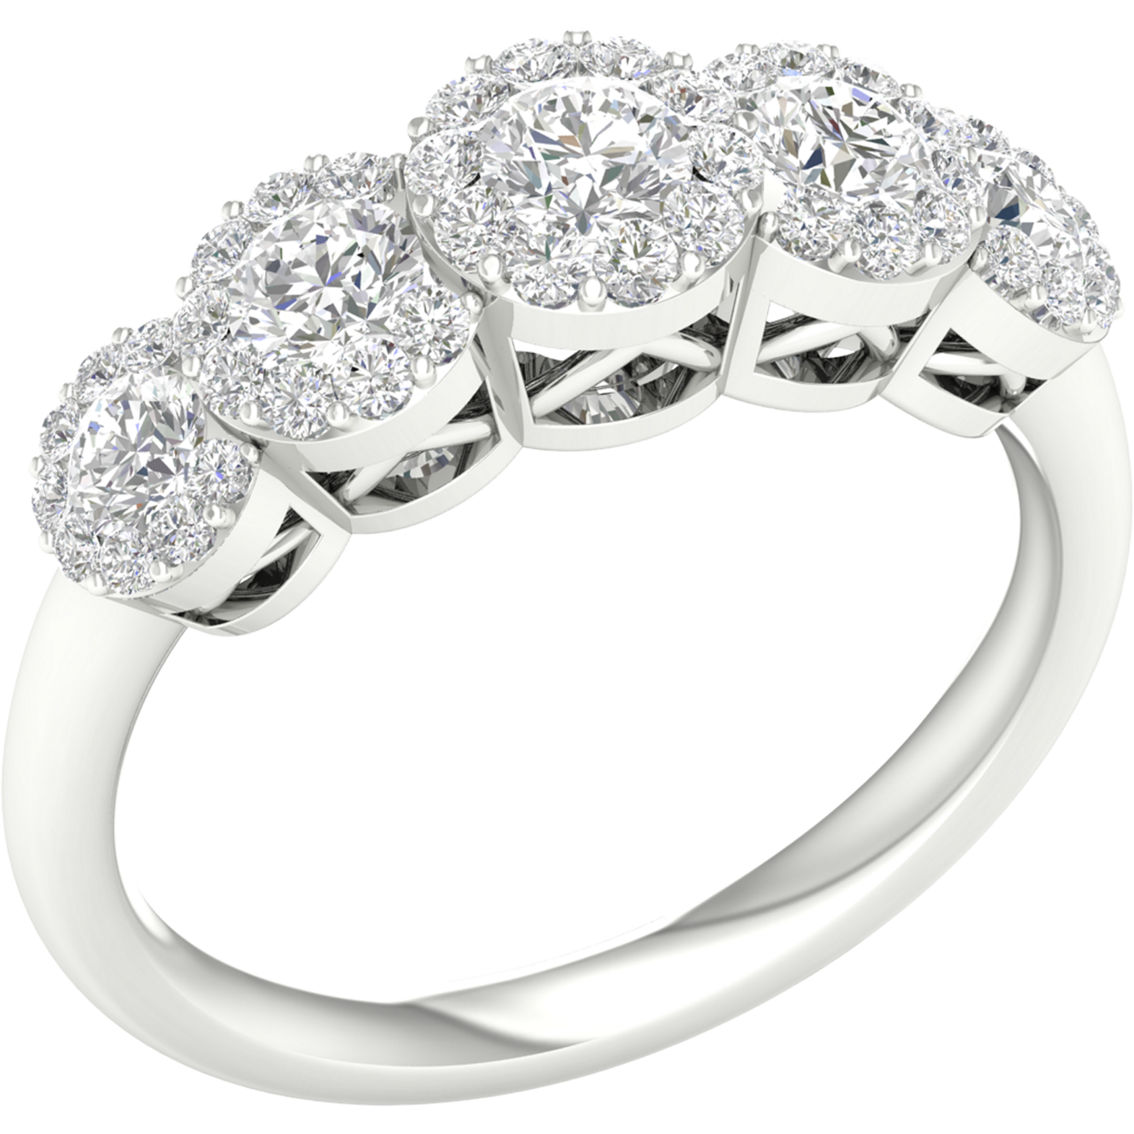 Pure Brilliance 14K White Gold 1 CTW Anniversary Band with IGI Certification - Image 2 of 2